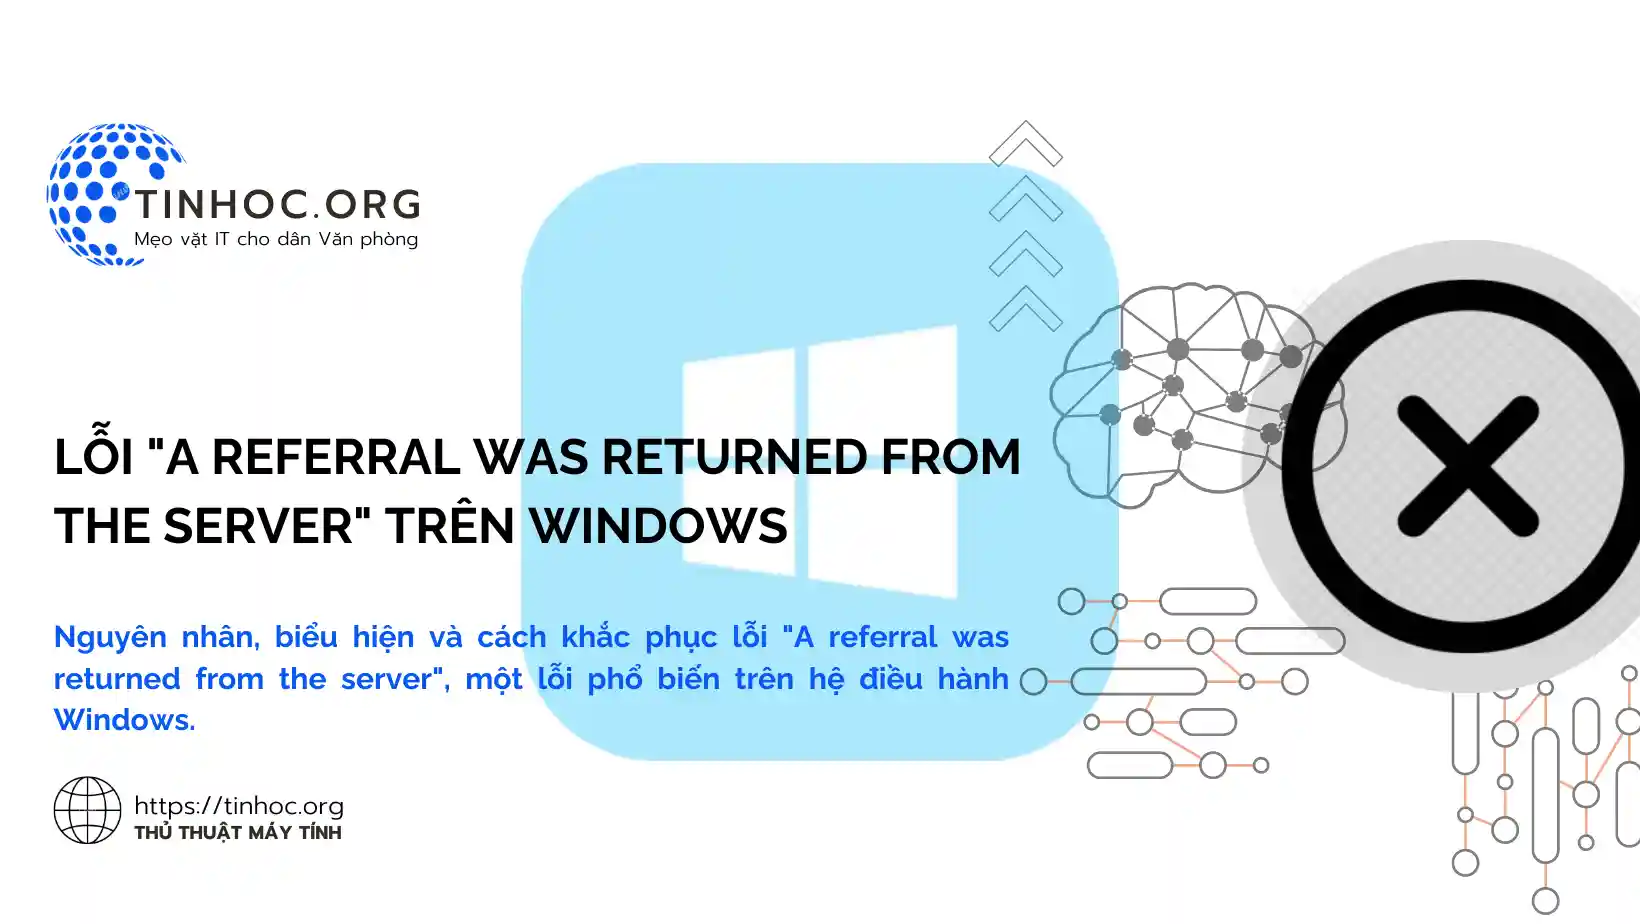 Lỗi "A referral was returned from the server" trên Windows